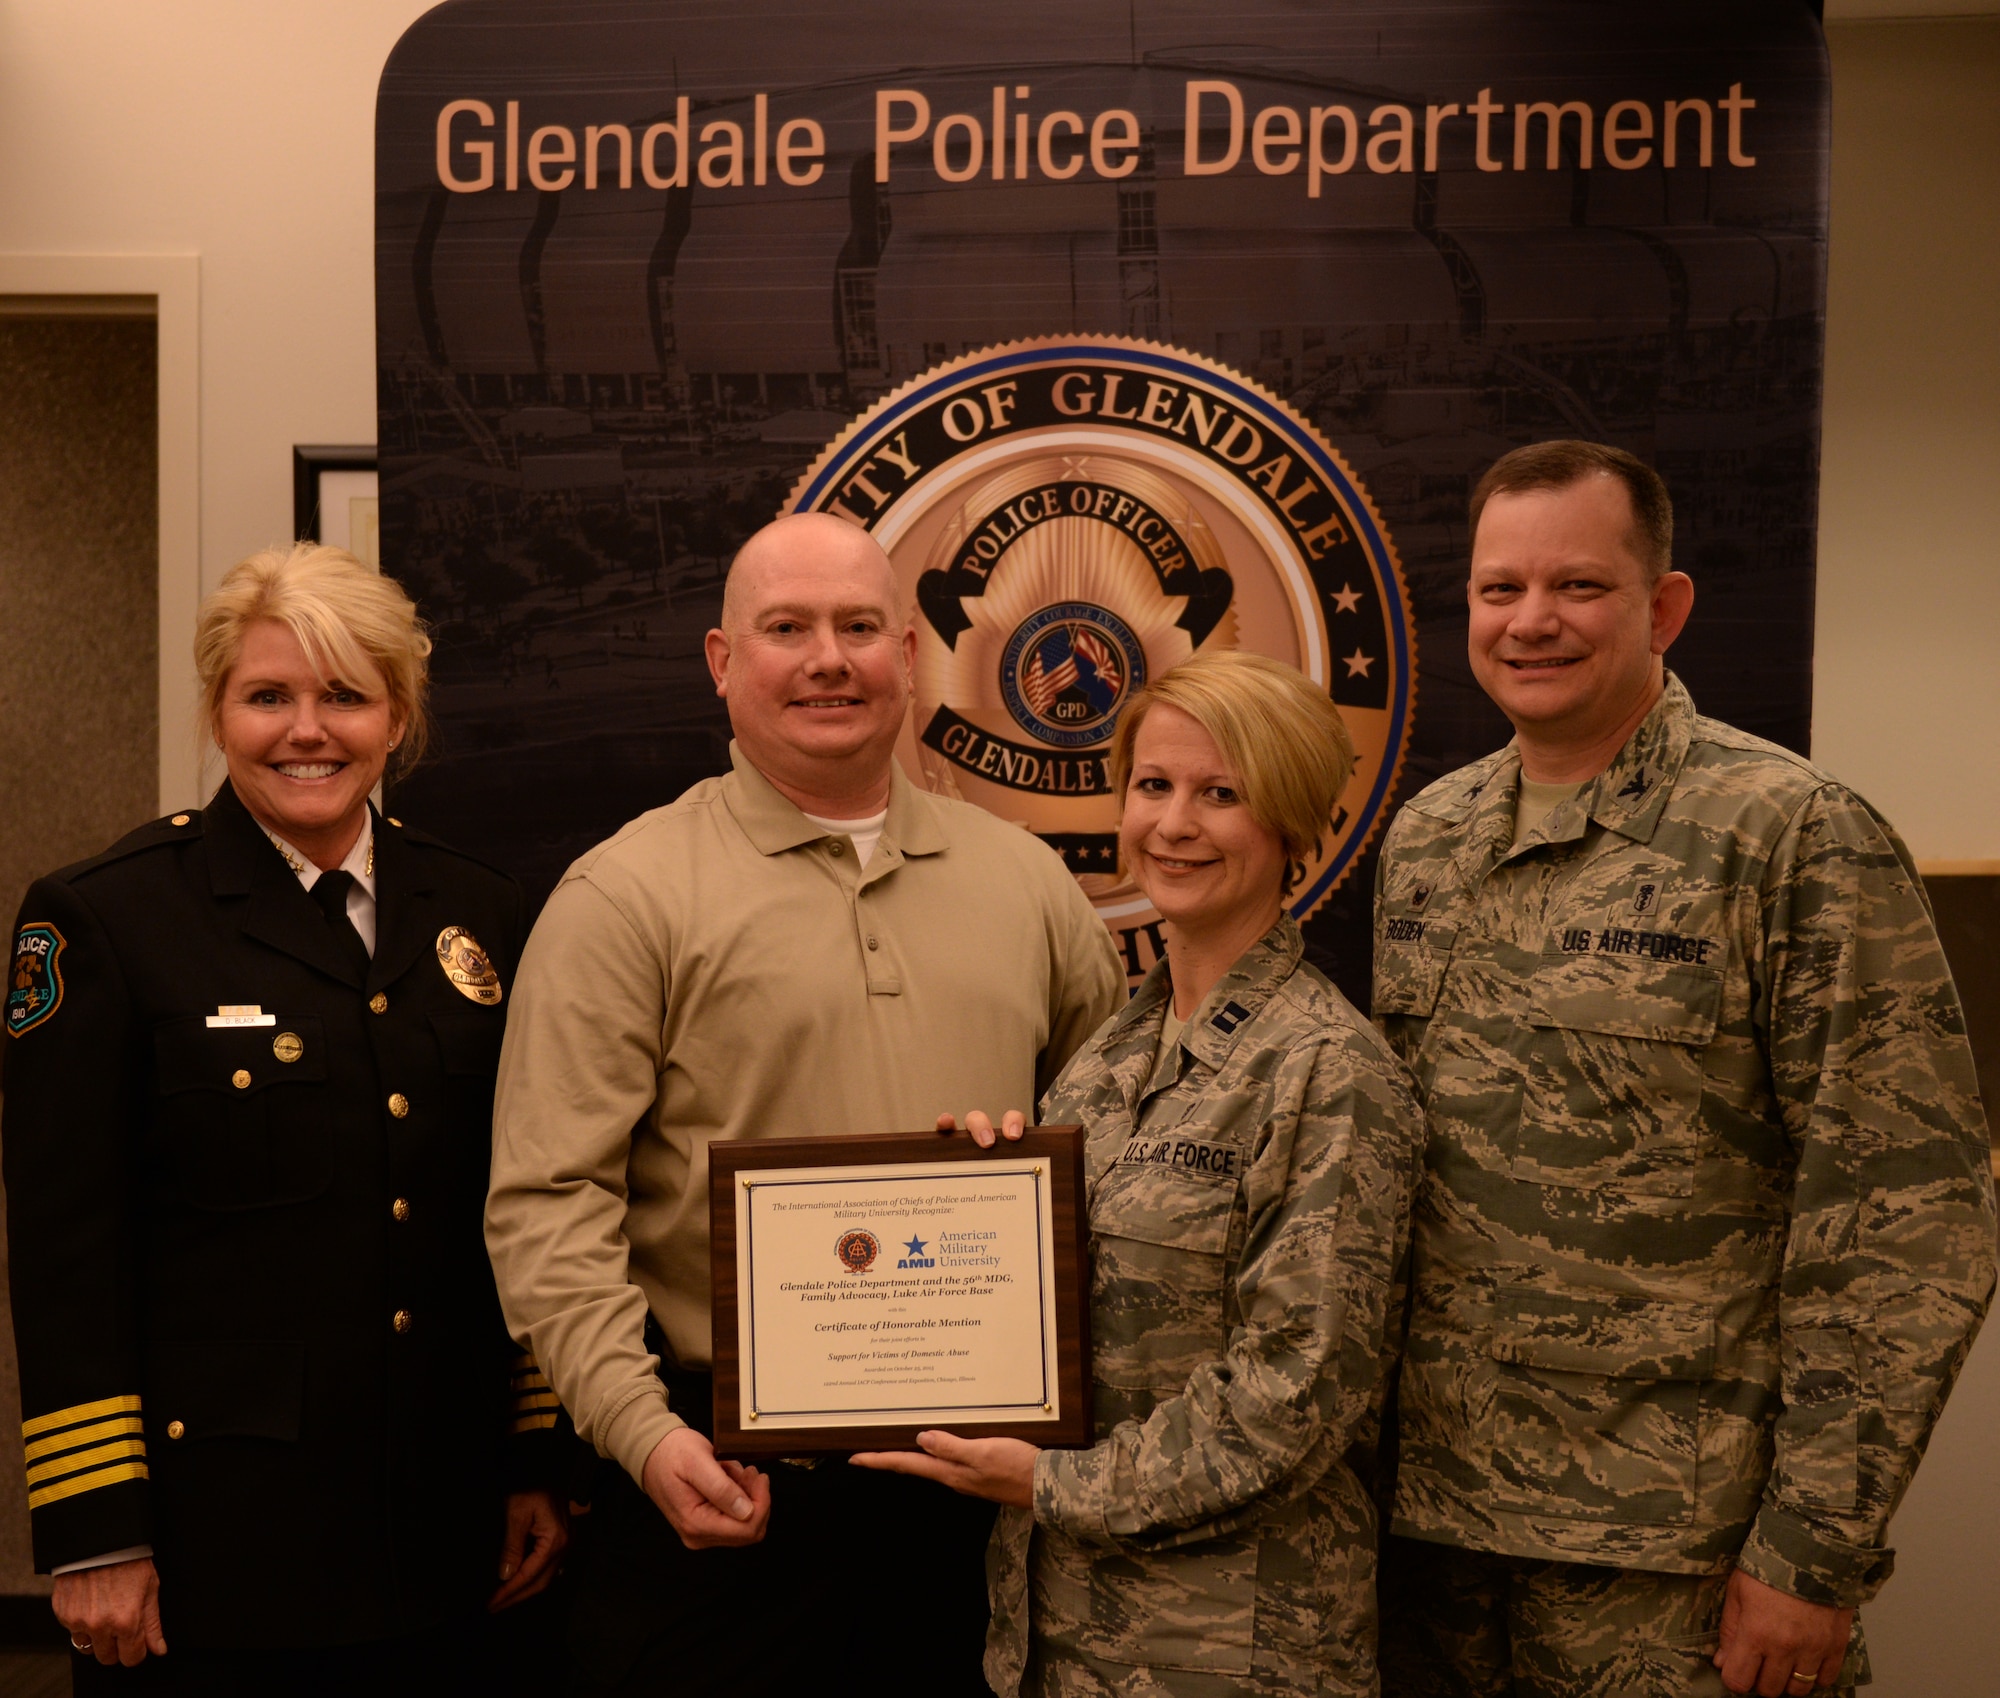 Debora Black, Glendale Chief of Police, Sgt. Patrick Beumler, Glendale Criminal Investigations Officer, Capt. Sonja Raciti, Luke Family Advocacy Officer, and Col. Stephen Boden, commander of the 56th Medical Operations Squadron, pose with an International Association of Chiefs of Police award Nov. 5, at the Glendale Family Advocacy Center. The award was presented to both the Glendale Police Department and the Luke FAC in honor of their joint efforts to support and protect victims of domestic violence and abuse. (U.S. Air Force photo by Airman 1st Class Ridge Shan)